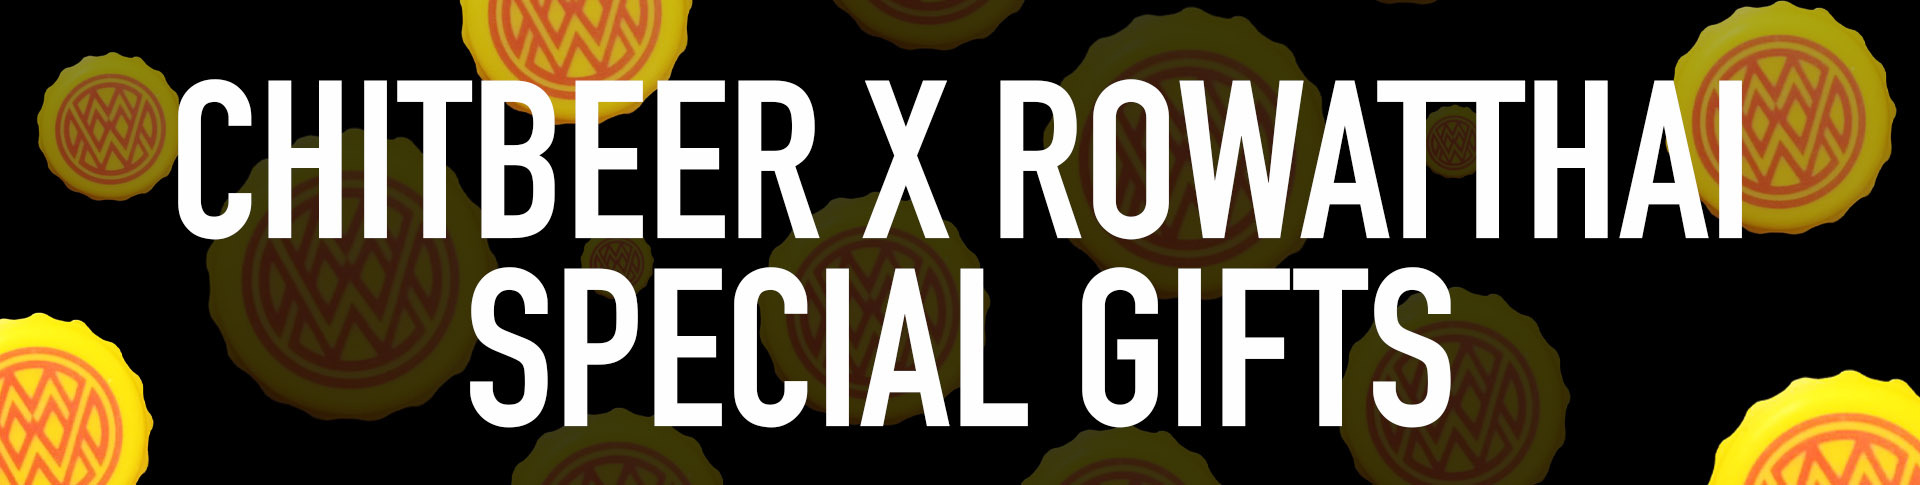 CHITBEER x ROWATTHAI SPECIAL GIFTS